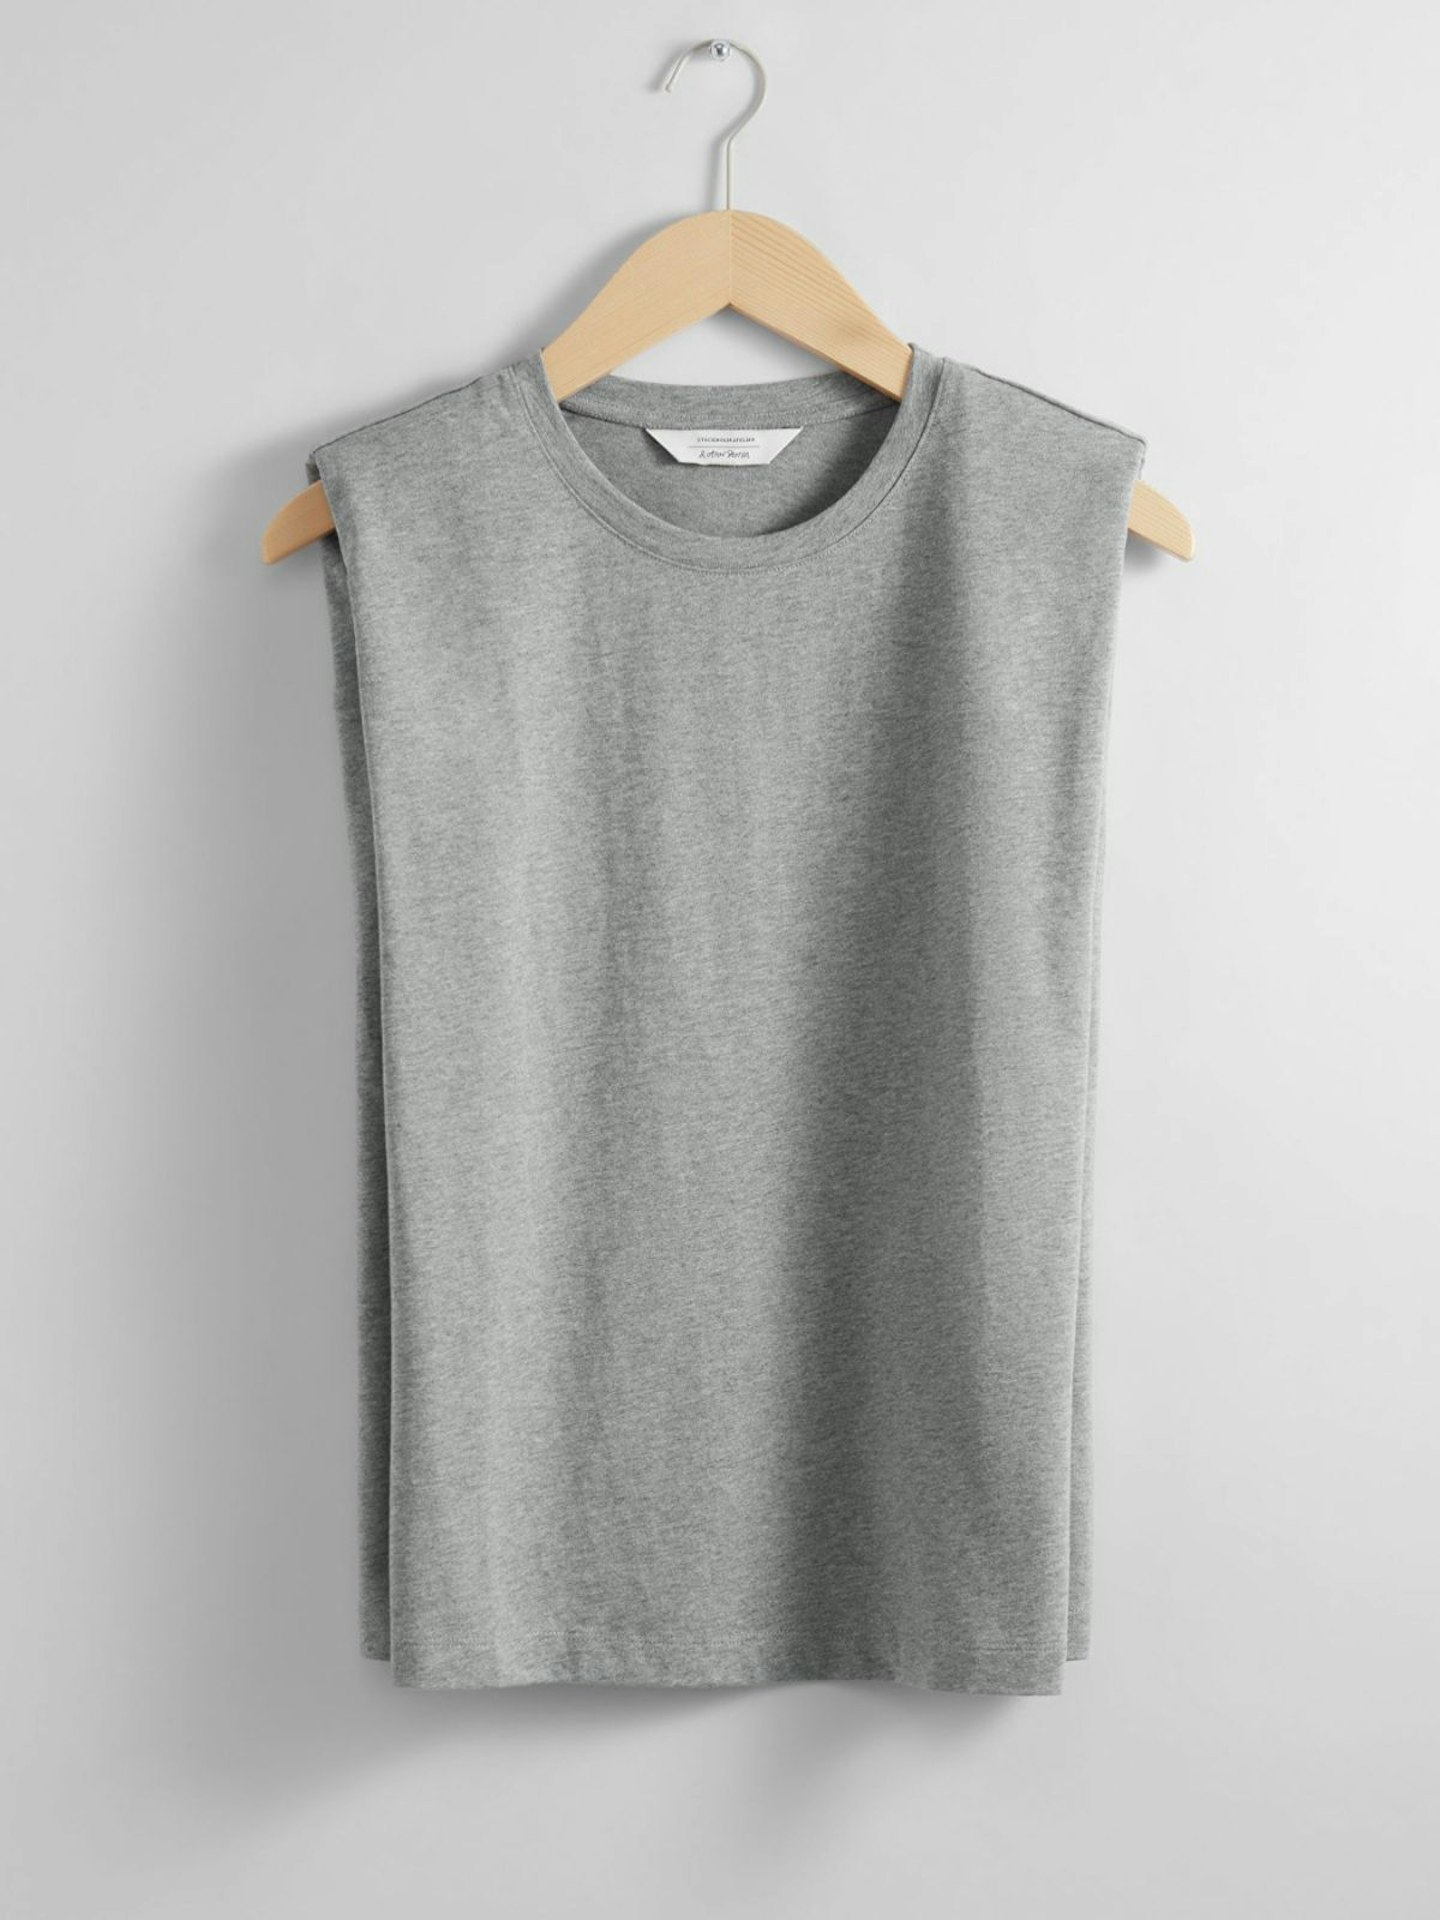 & Other Stories Padded-Shoulder Tank Top